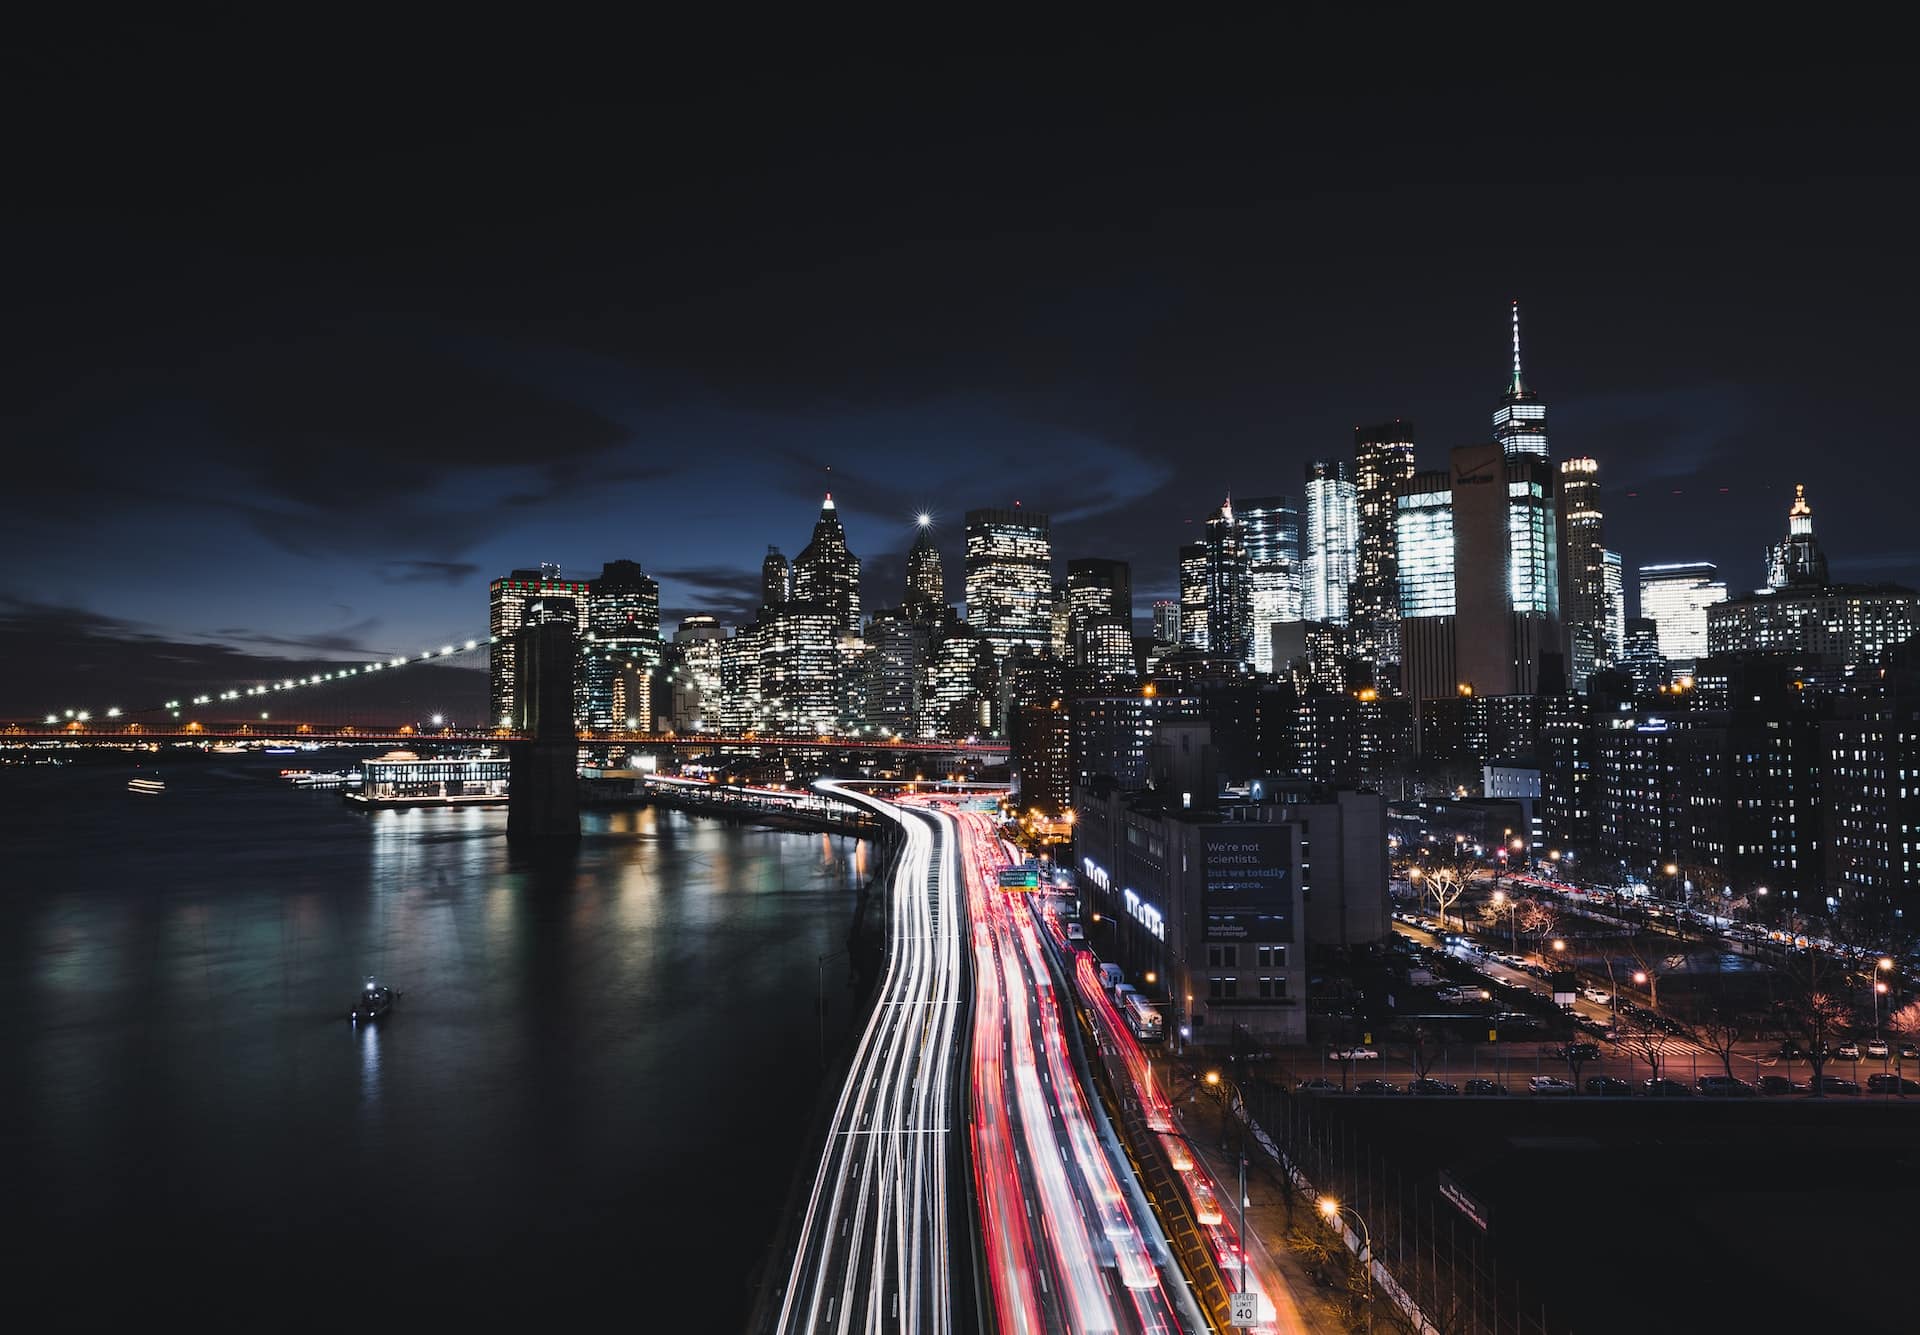 a nighttime long exposure photo of traffic in new york city with red and white lights